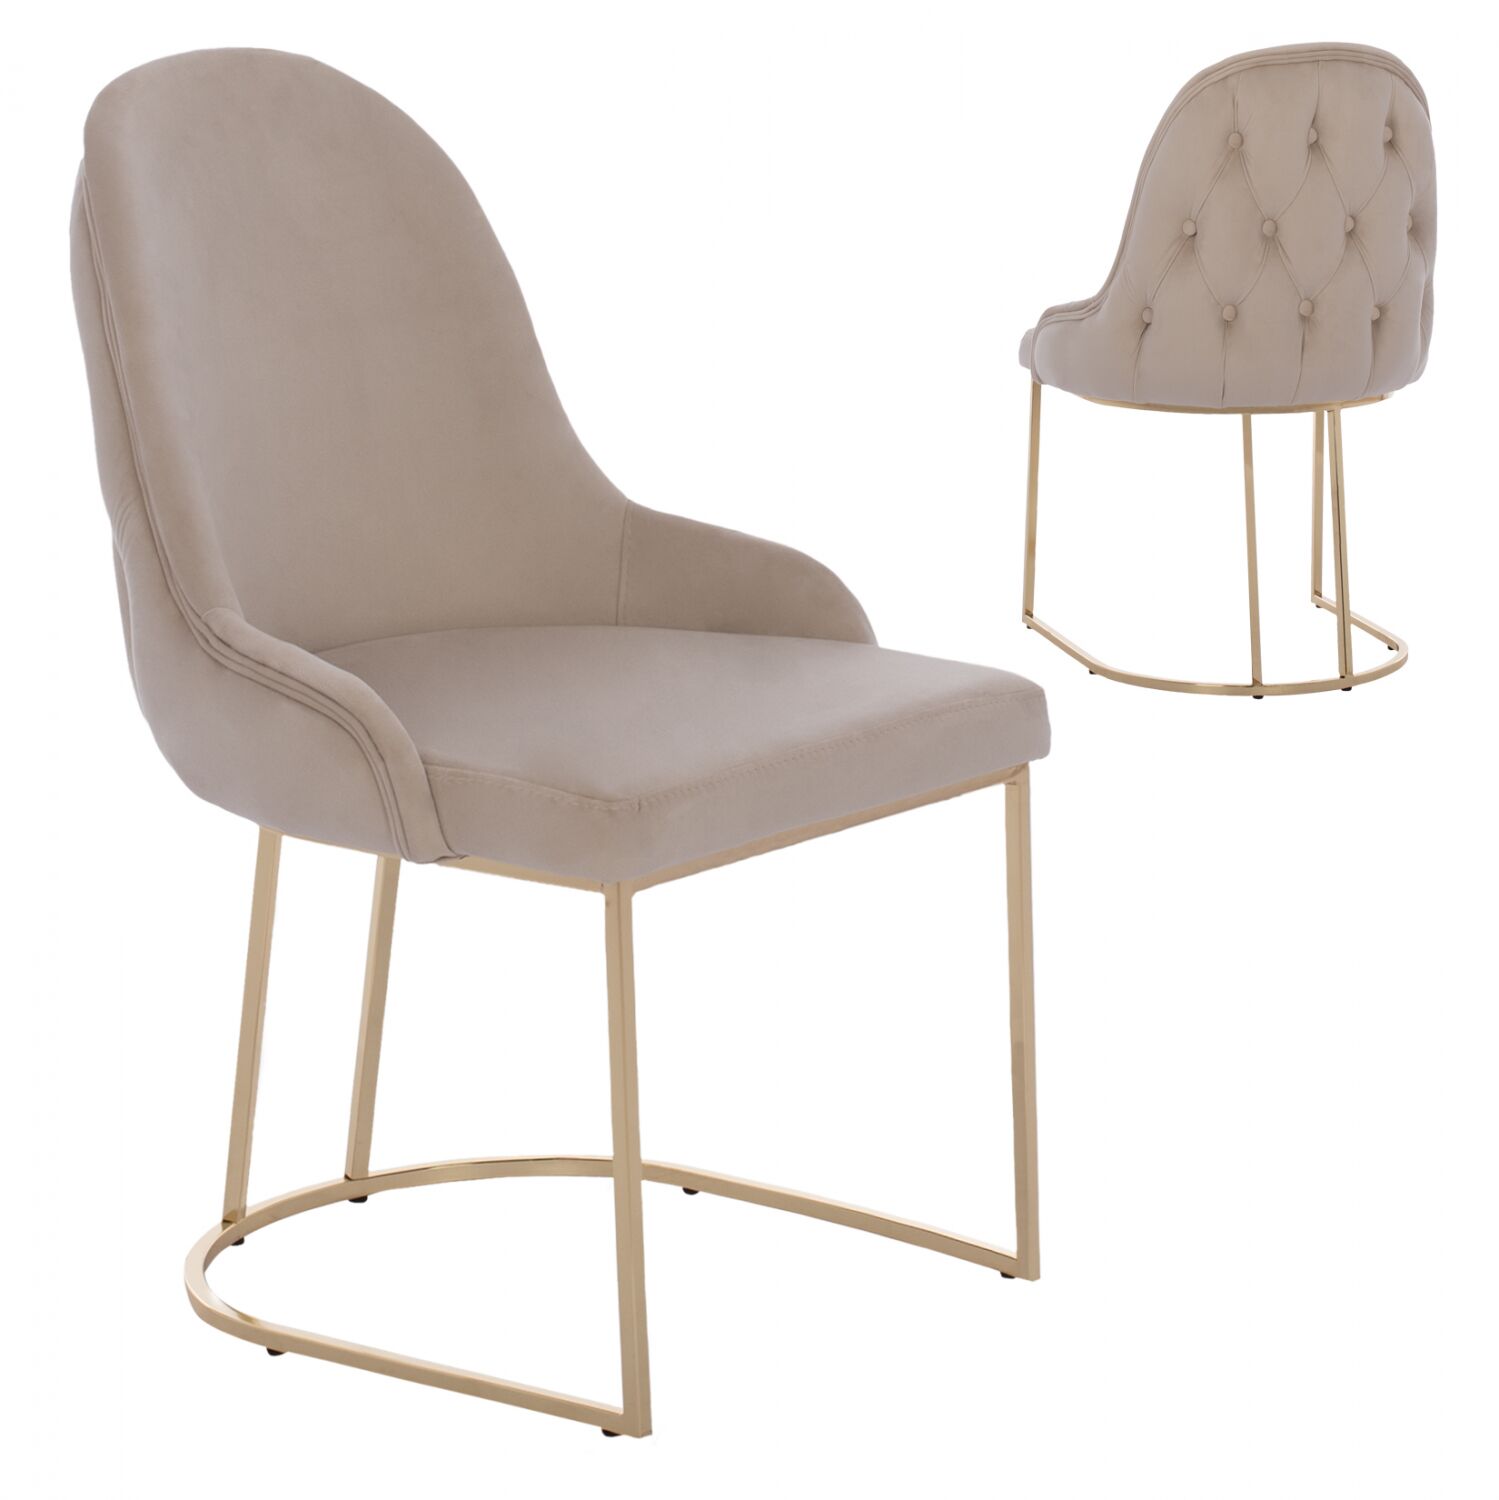 CHAIR “LILIANA” HM9277.07 ECRU VELVET WITH METAL LEGS IN GOLD COLOR 55x64x90H CM.